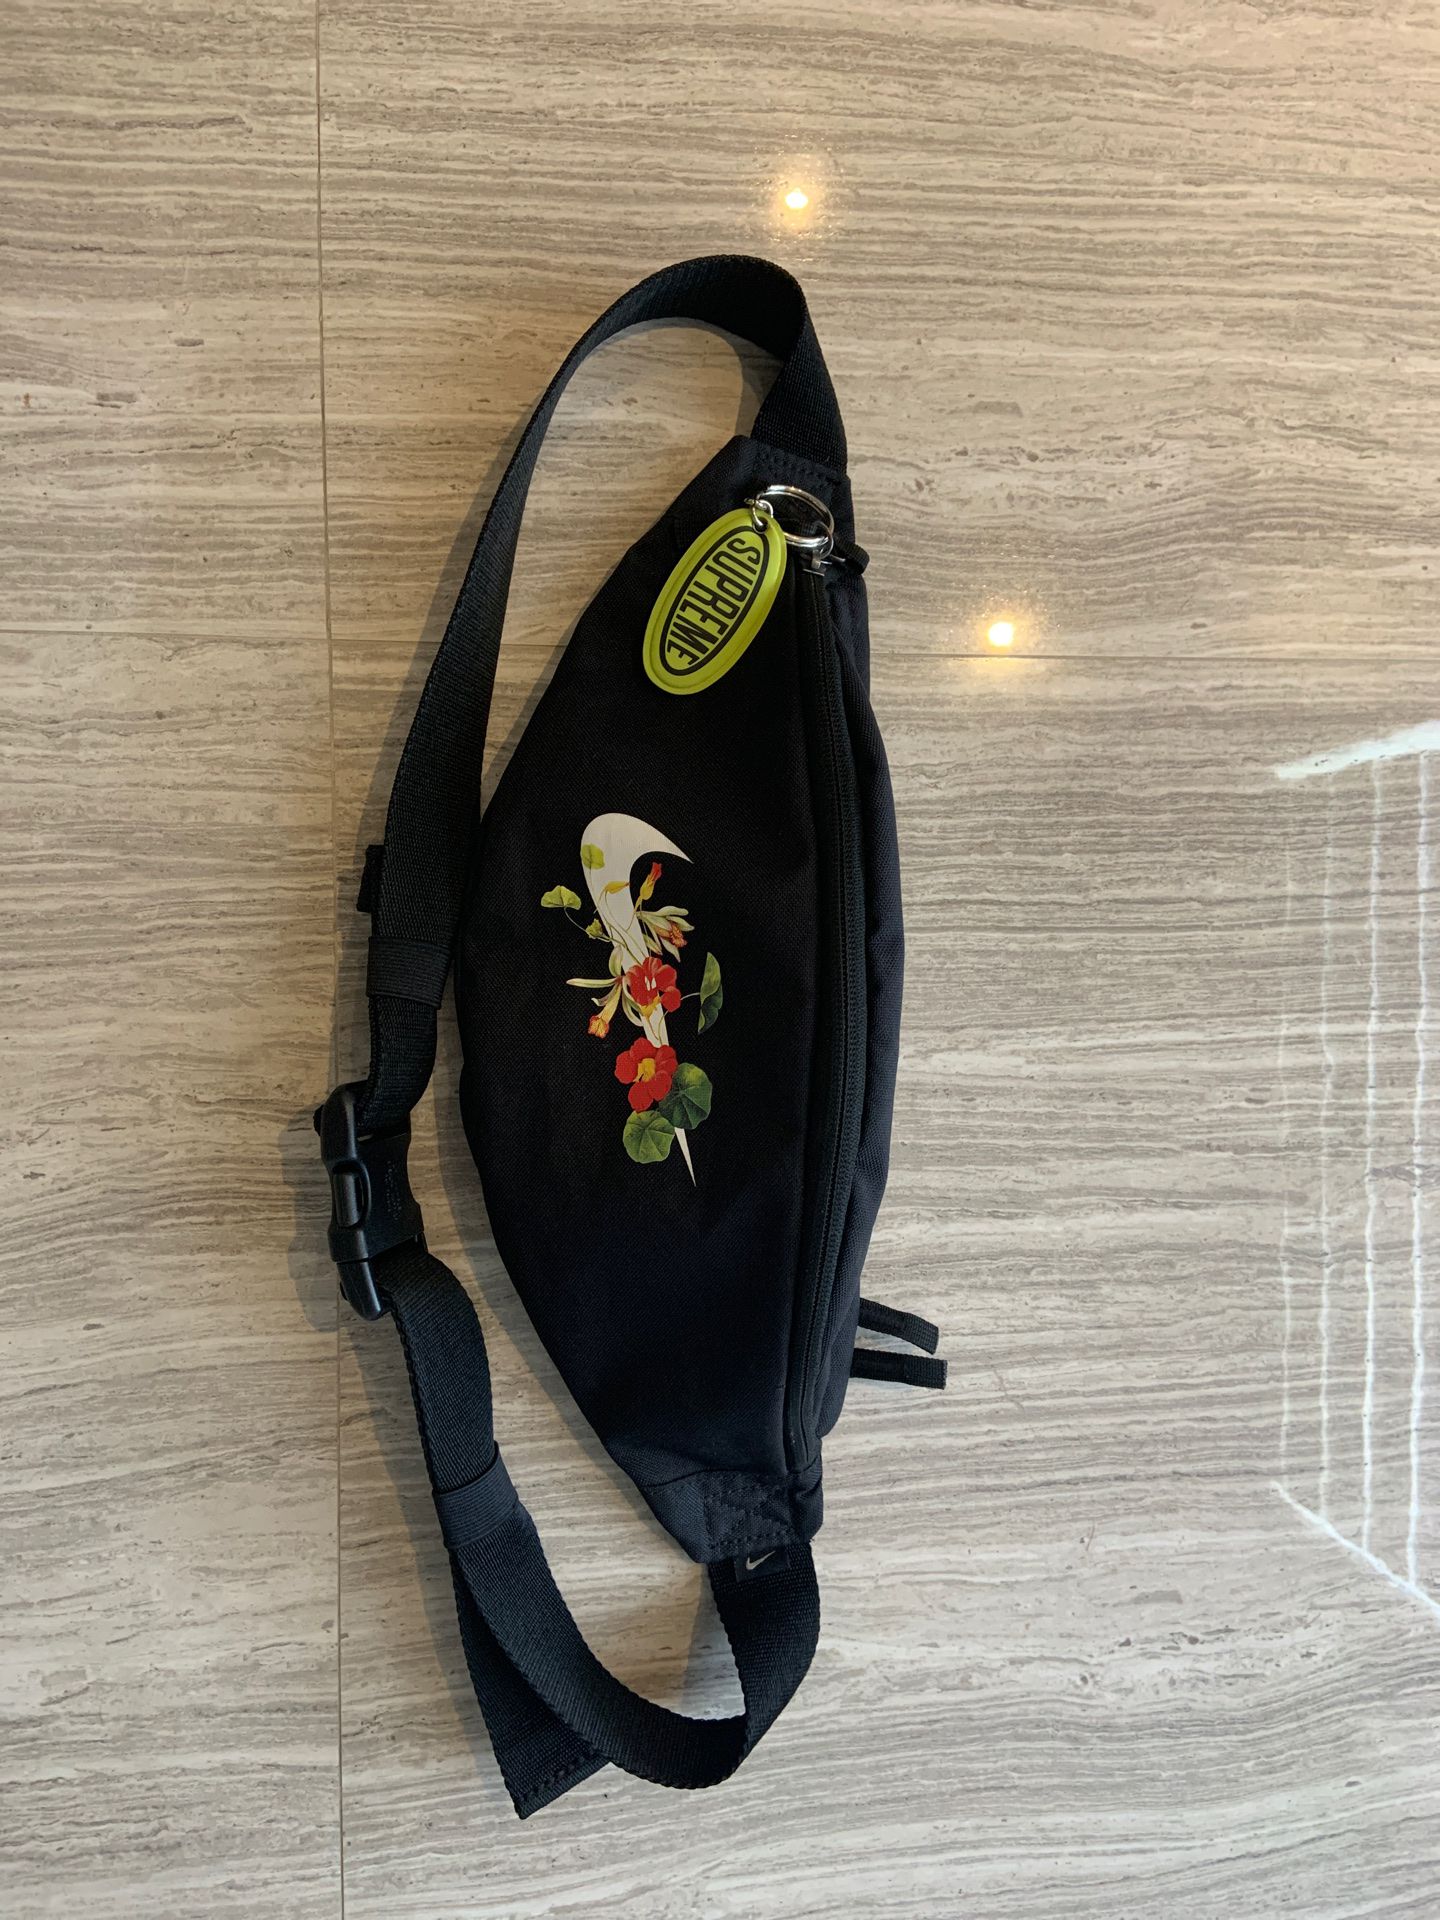 Fanny Pack w Supreme Keychain included!